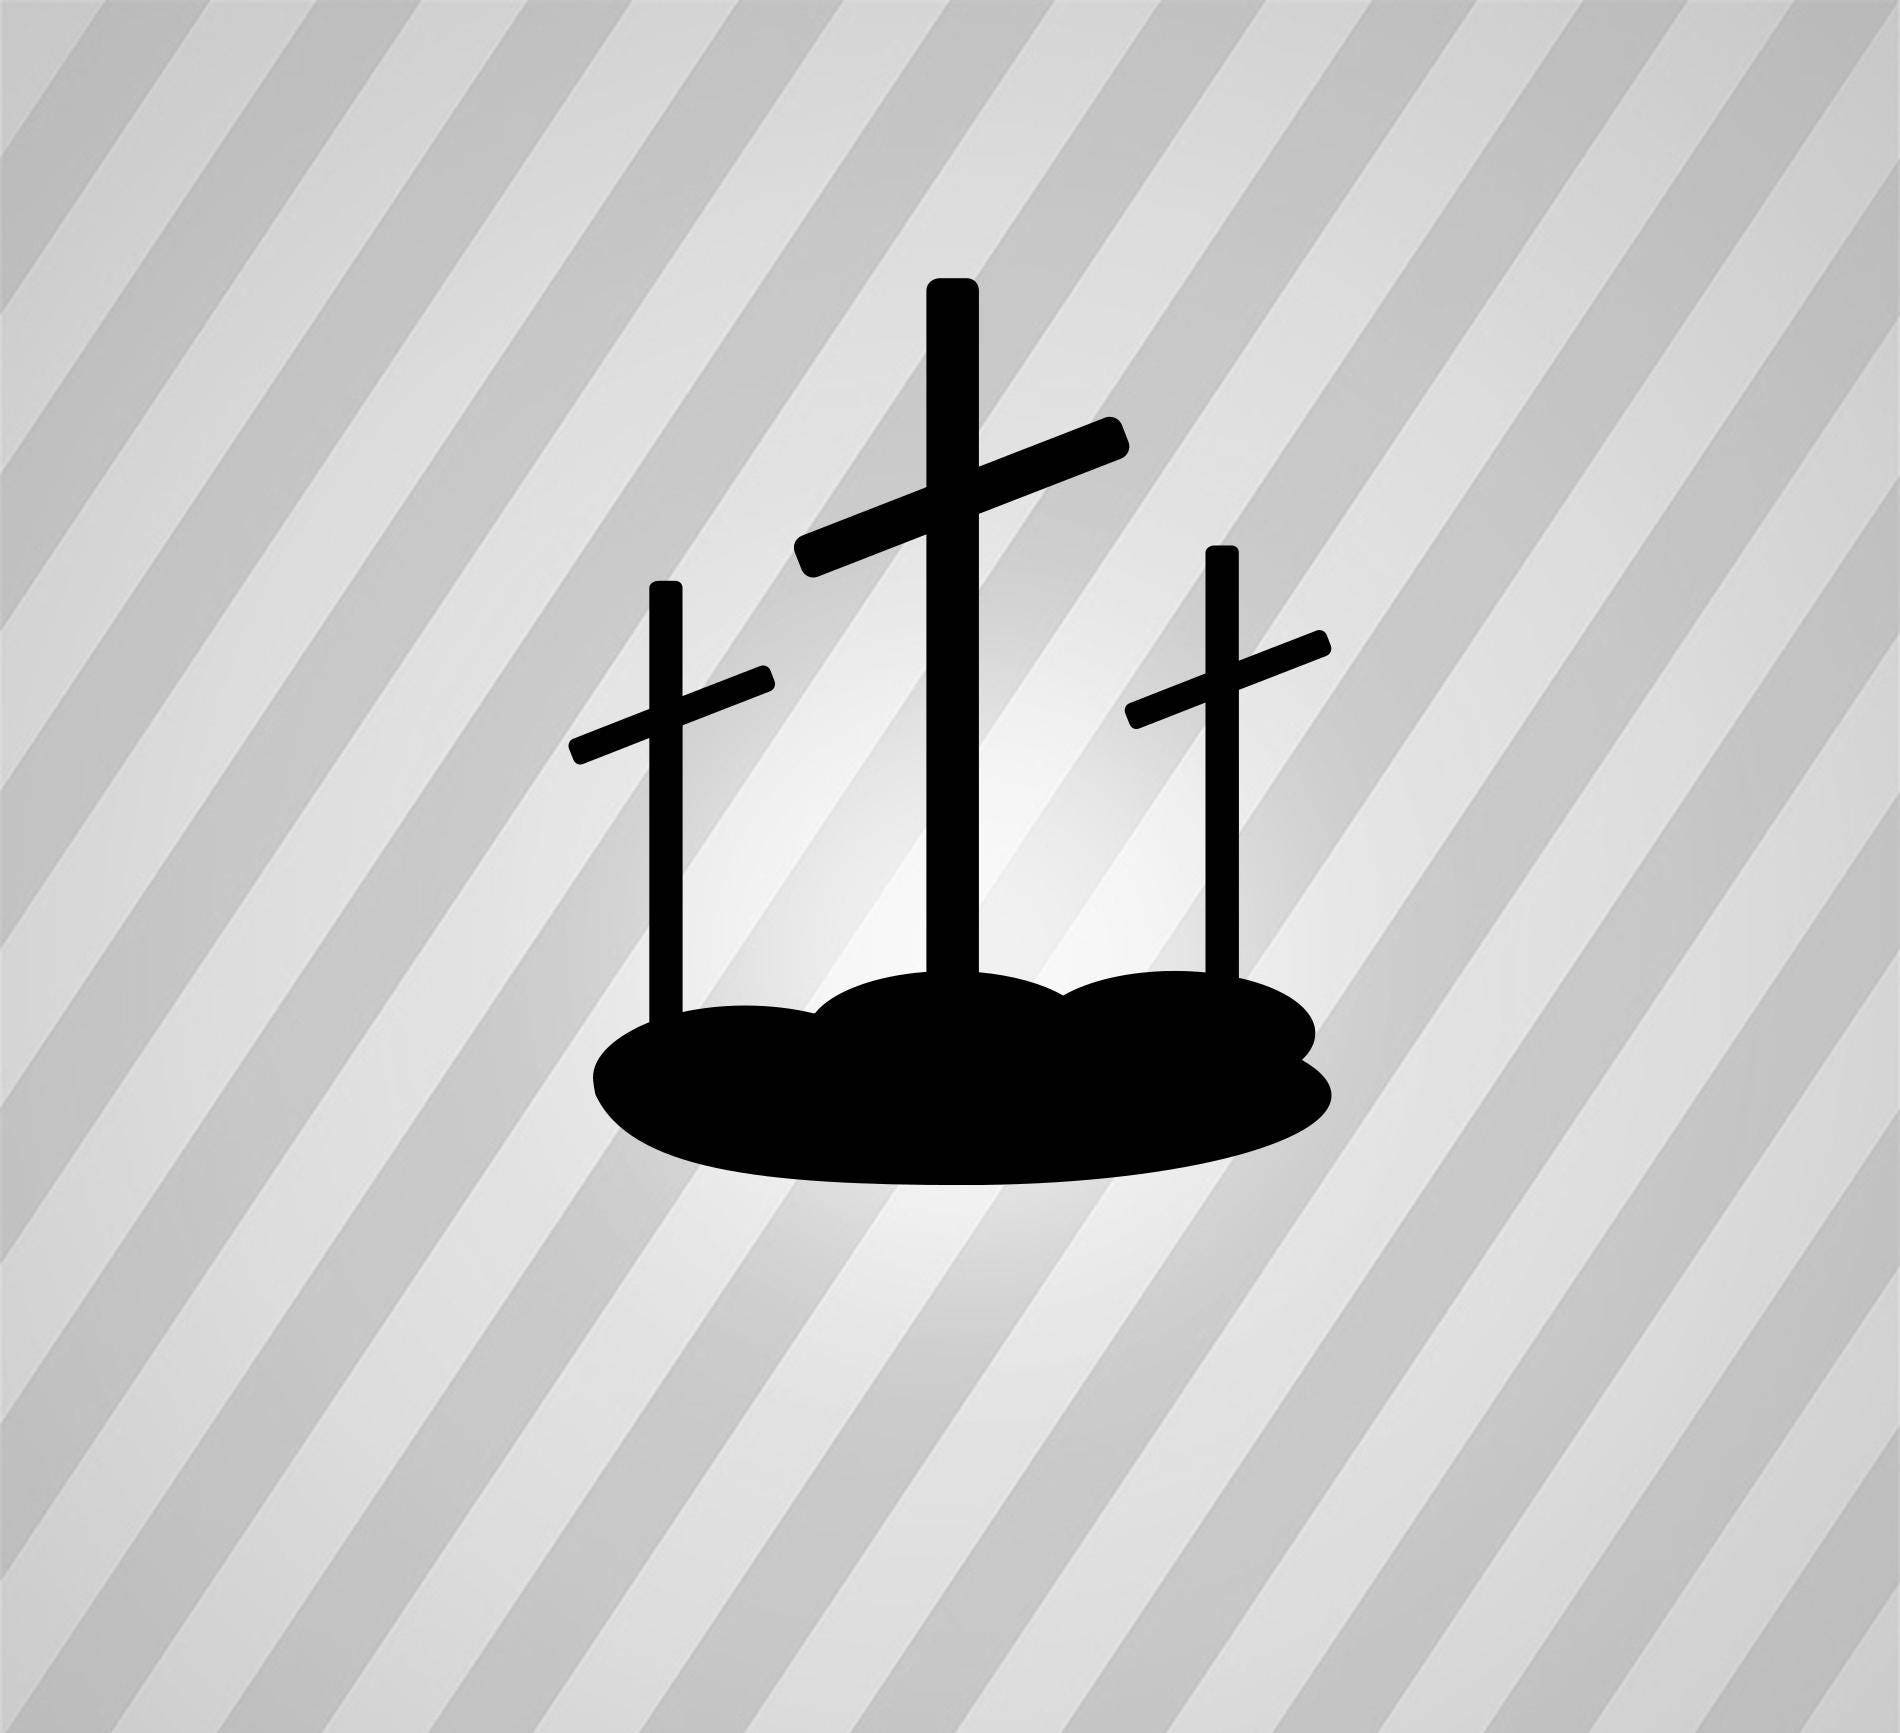 Download Three Crosses Silhouette Cross - Svg Dxf Eps Silhouette ...